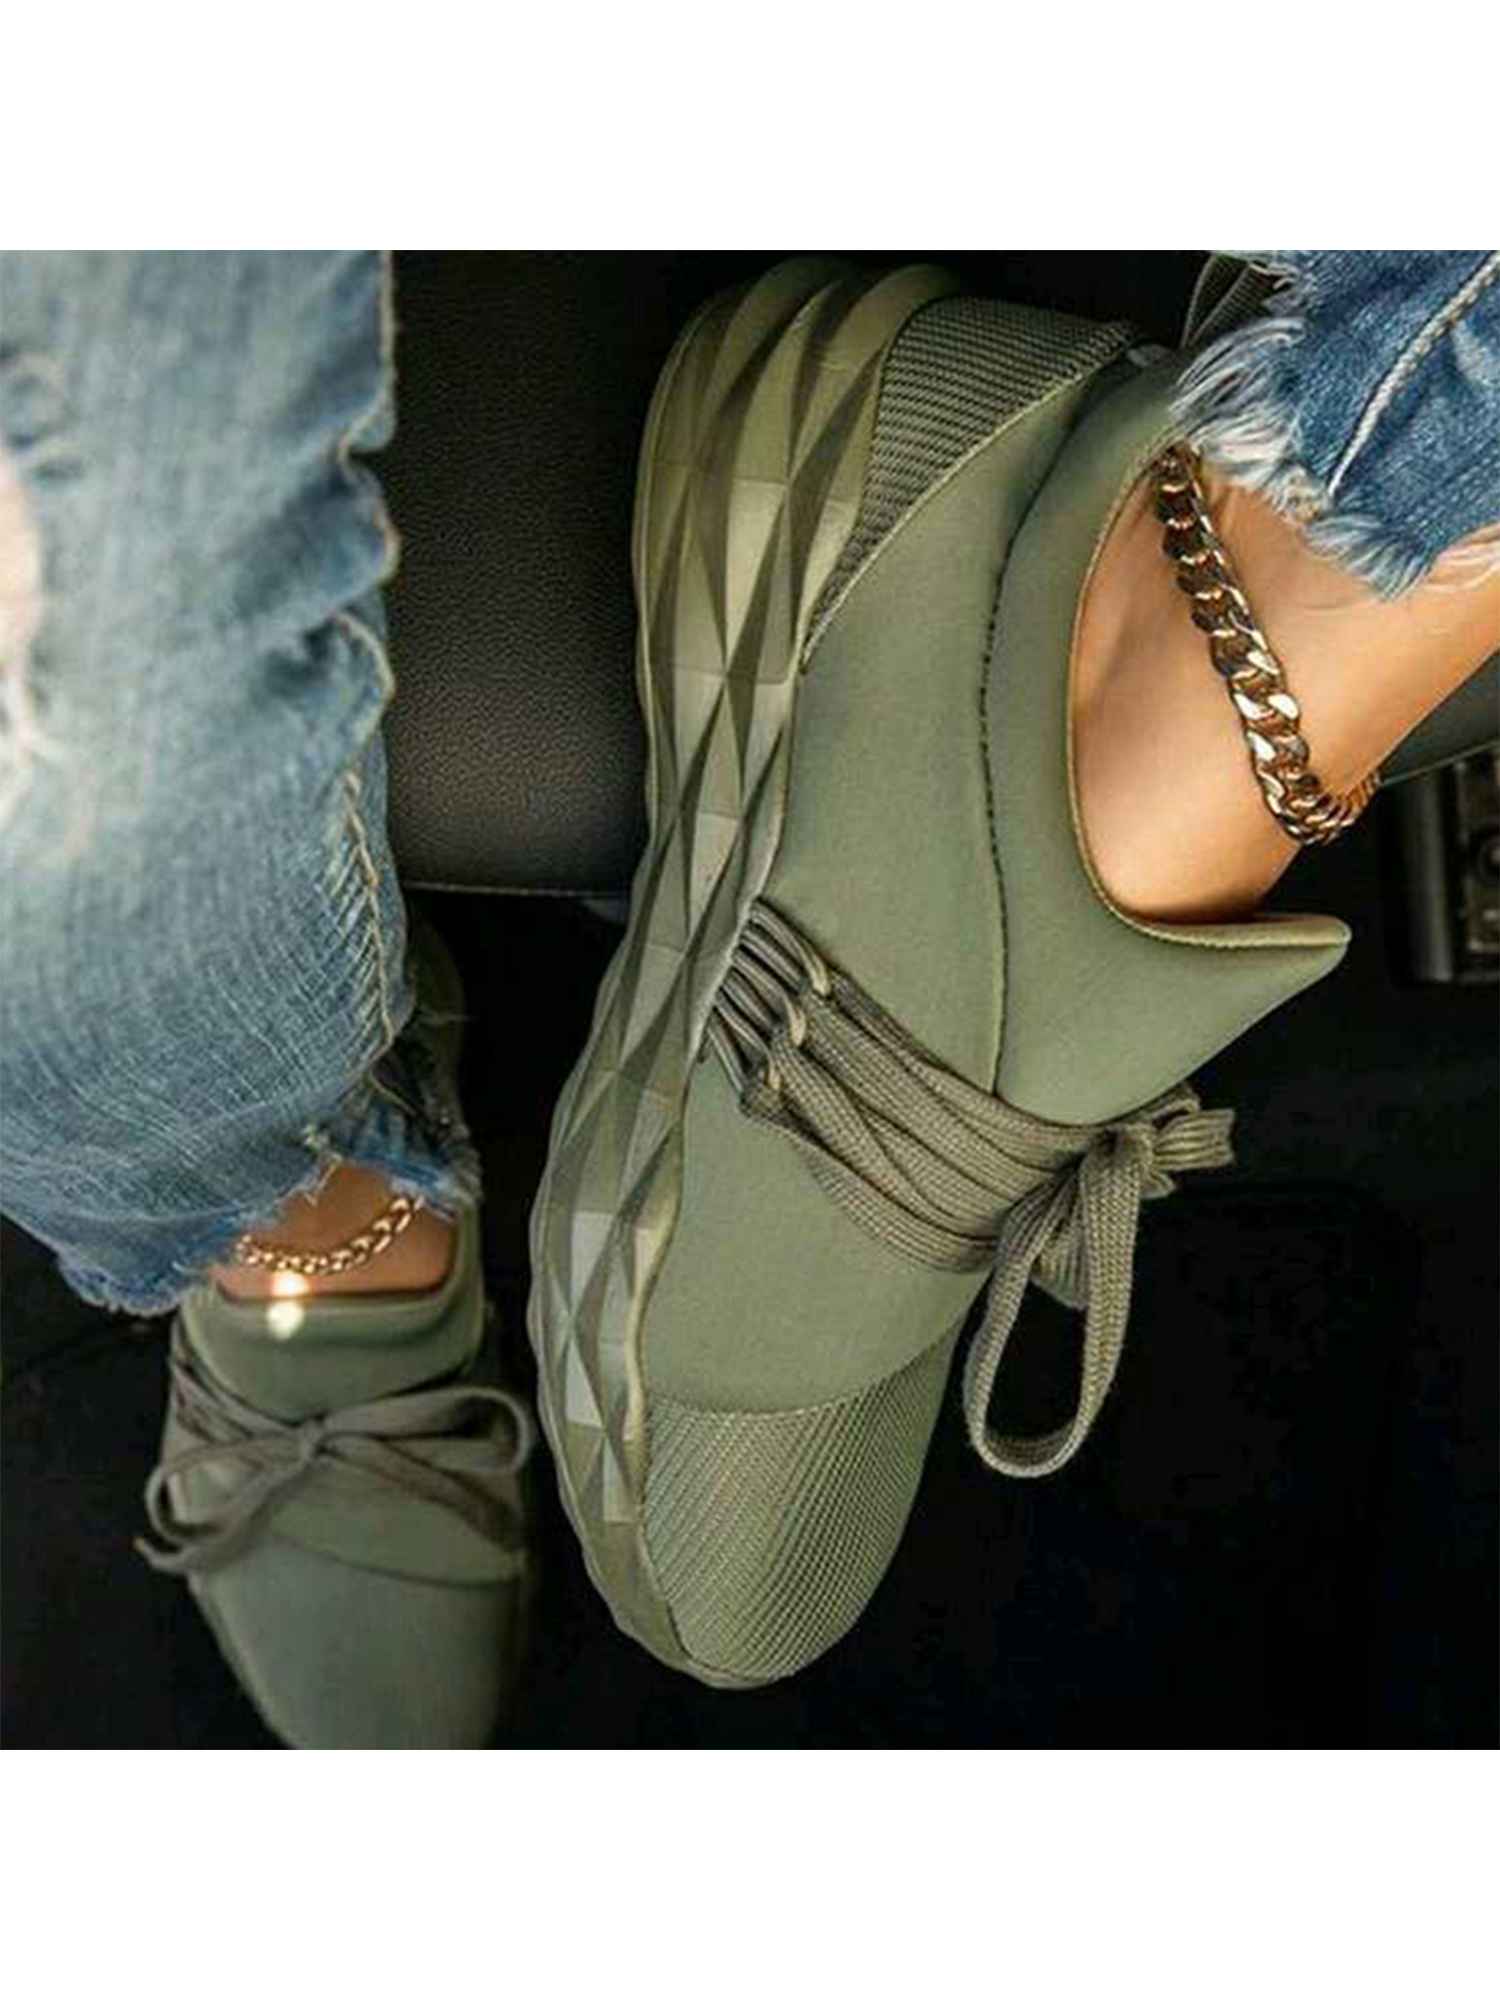 Avamo Lace UP Flying Weaving Cloth Women Flat Casual Shoes - image 3 of 3